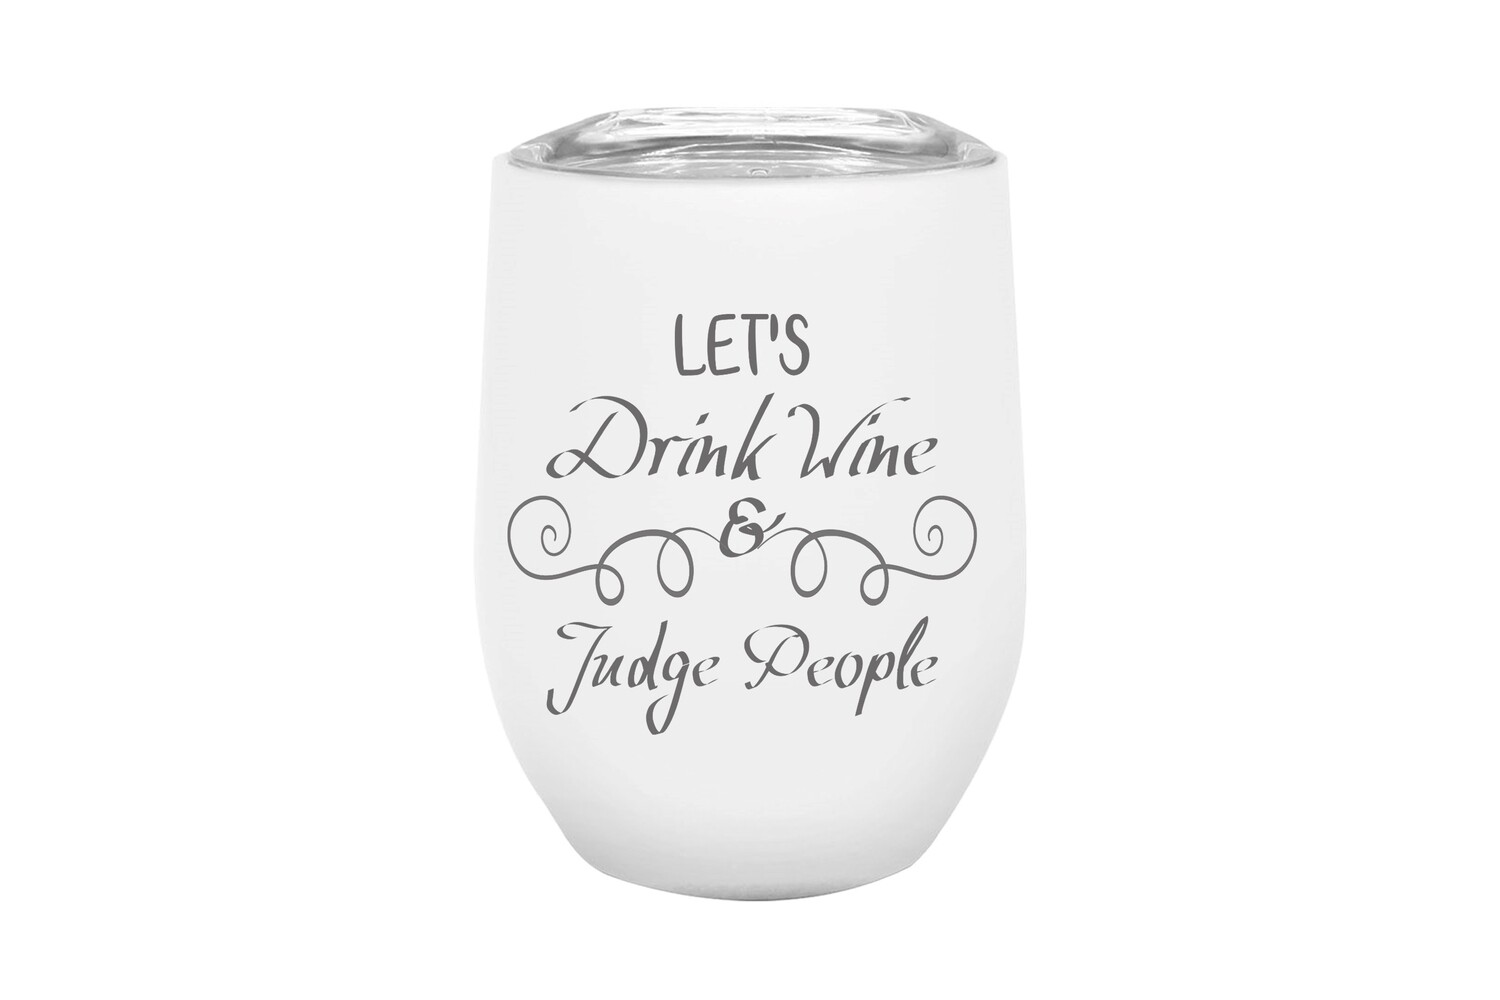 Let's Drink Wine & Judge People Insulated Tumbler 12 oz